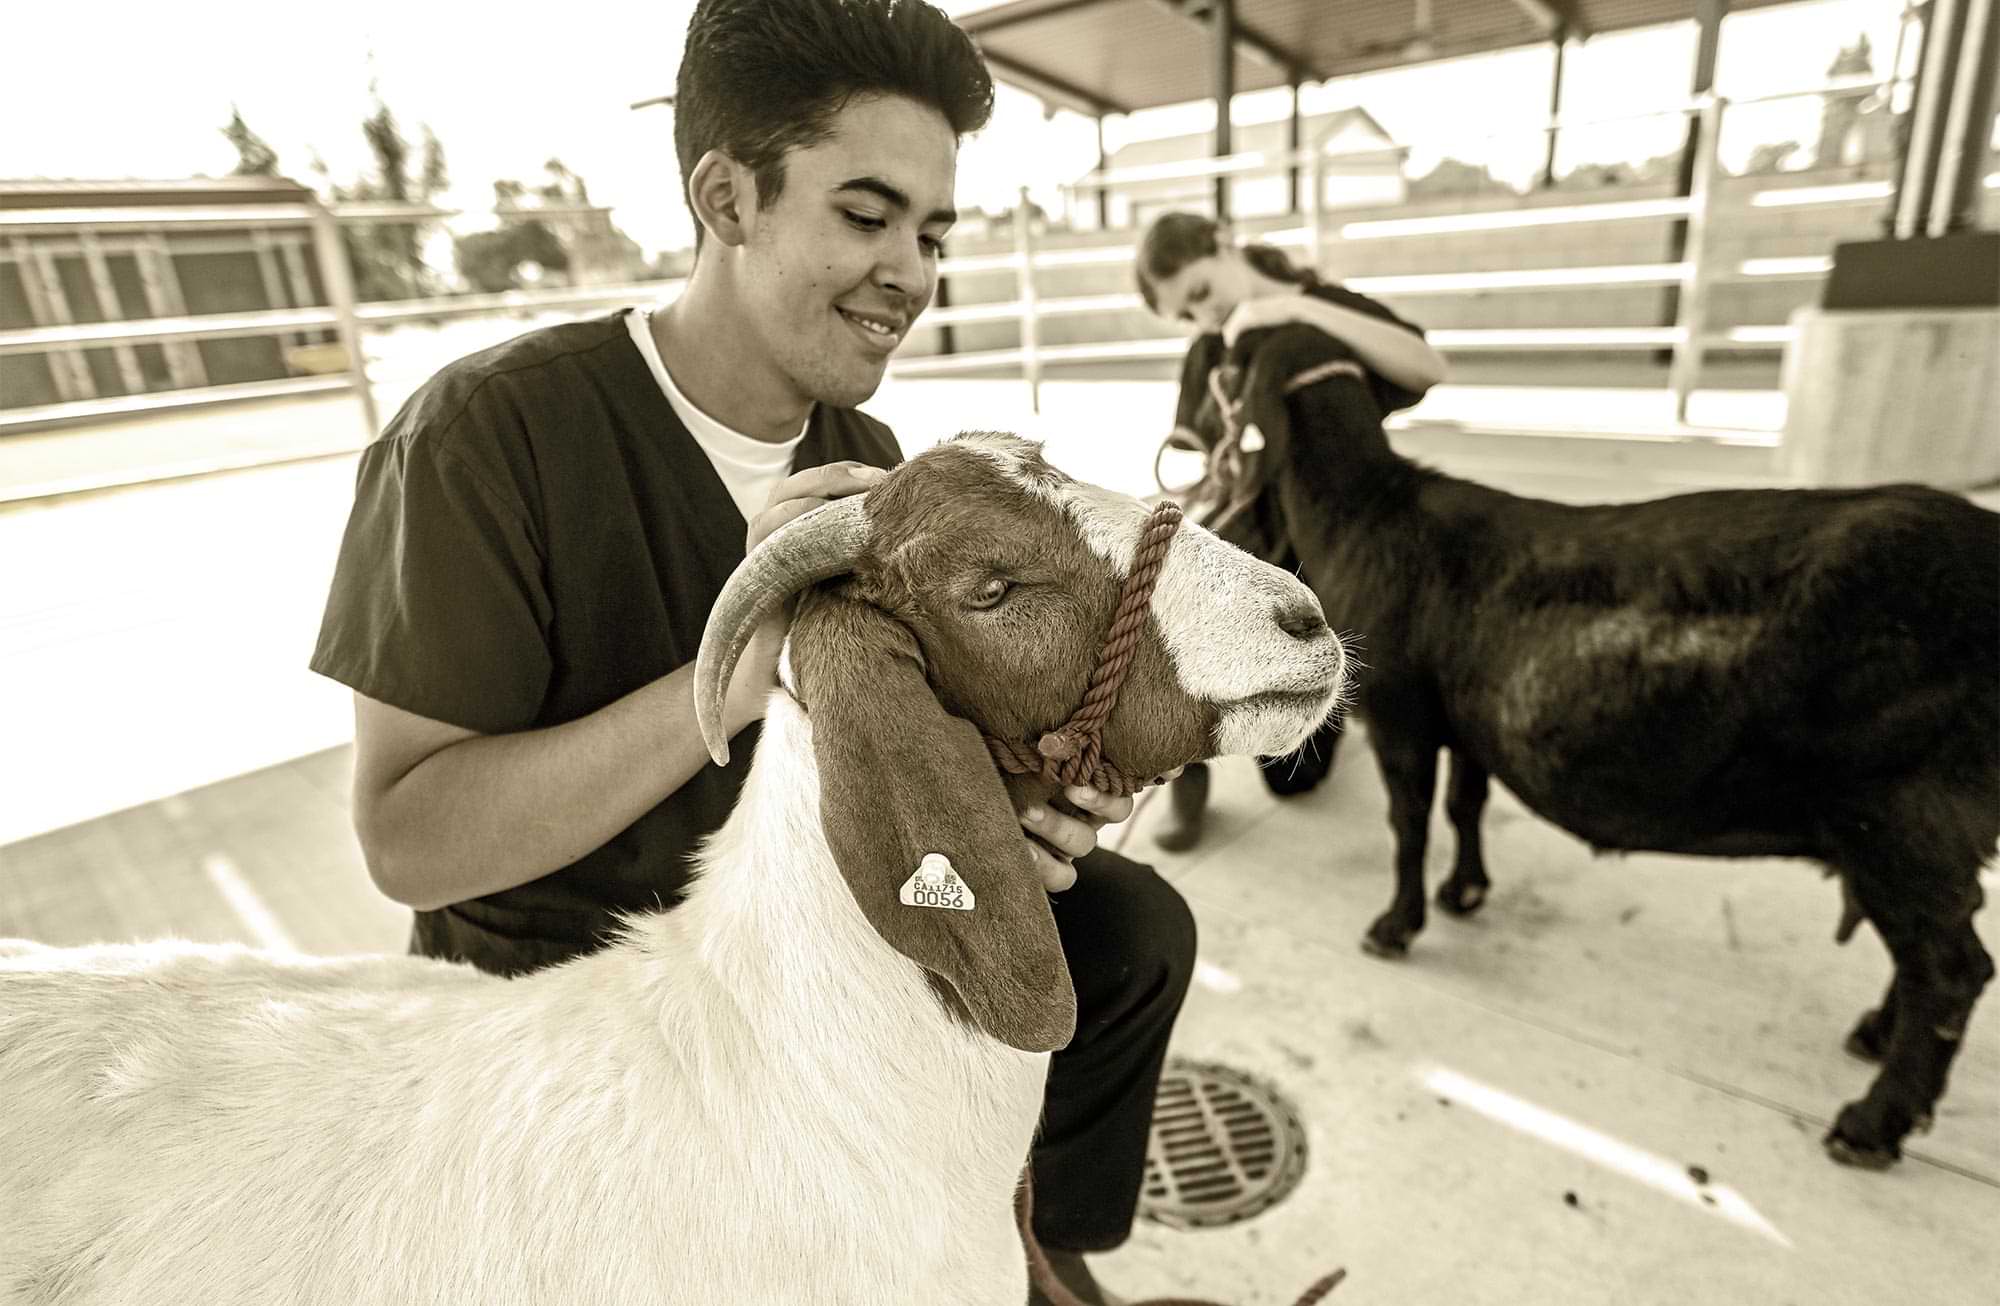 two male and female Covina High School students participating in the Agriculture Program “The Farm” tend to to goats